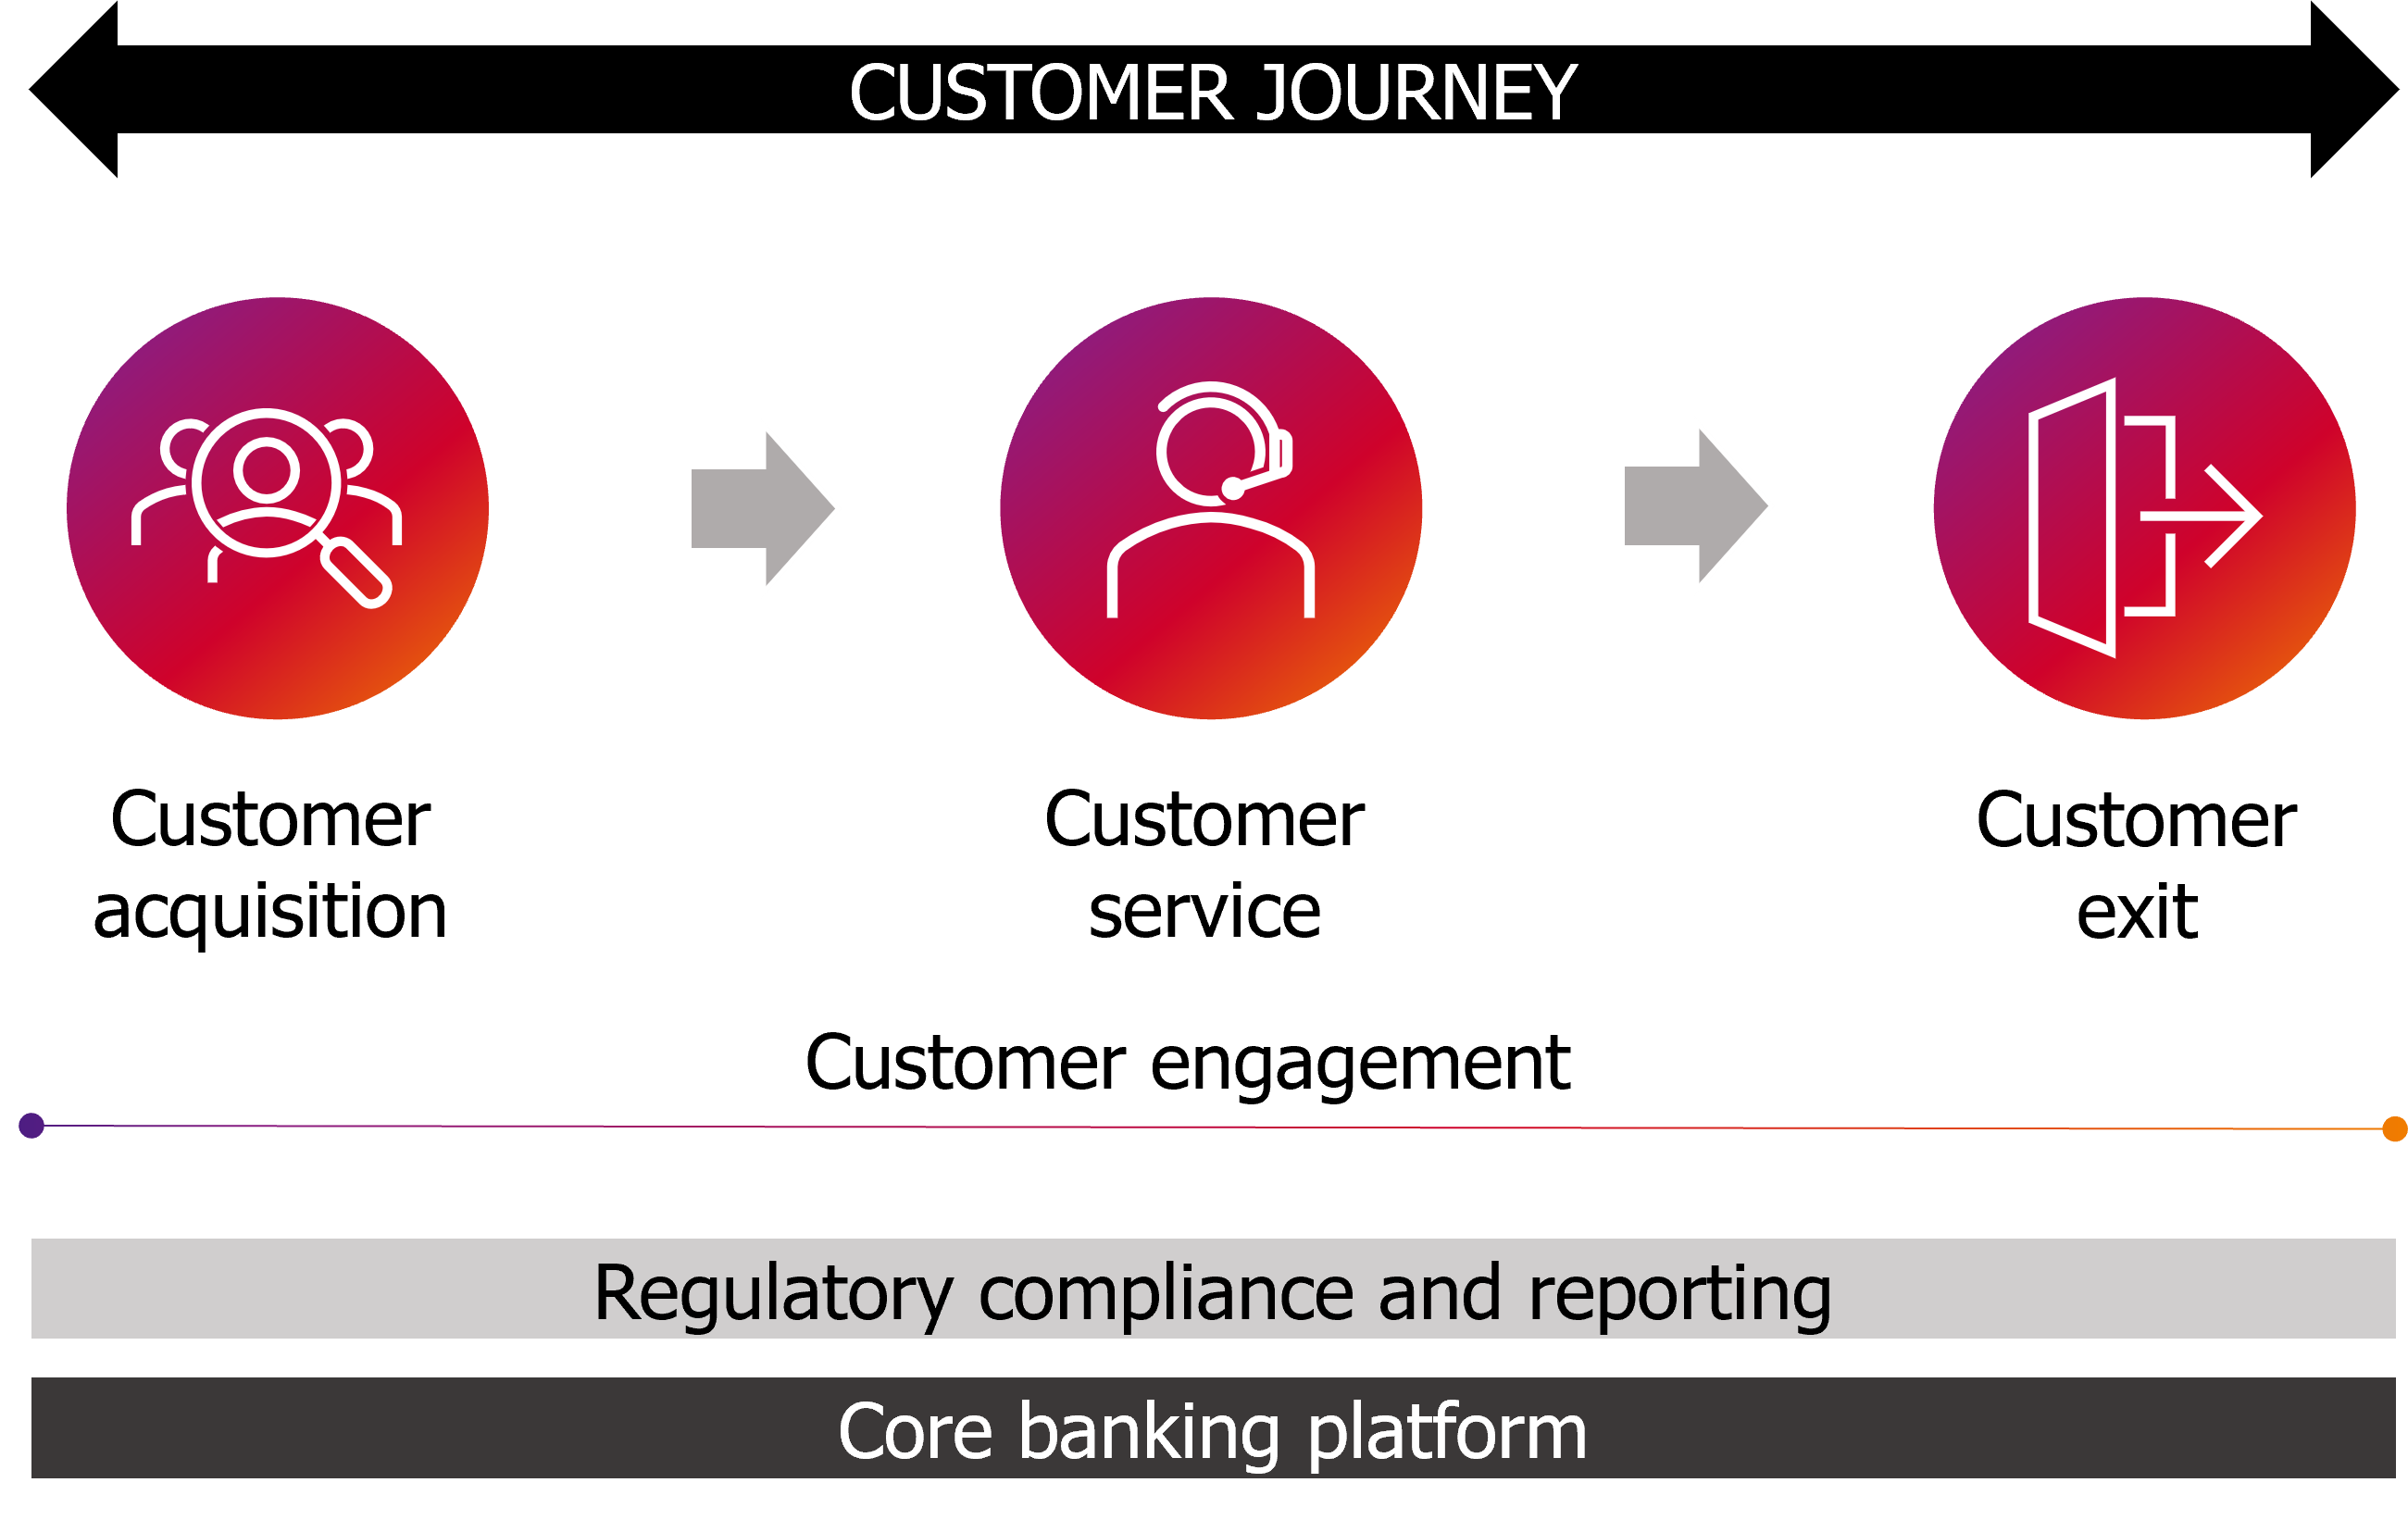 Graphic with customer acquisition, customer service and customer exit and an arrow covering them all saying customer journey at the top, and one at the bottom saying customer engagement. Two boxes at the bottom saying regulatory compliance and reporting, and core banking platform